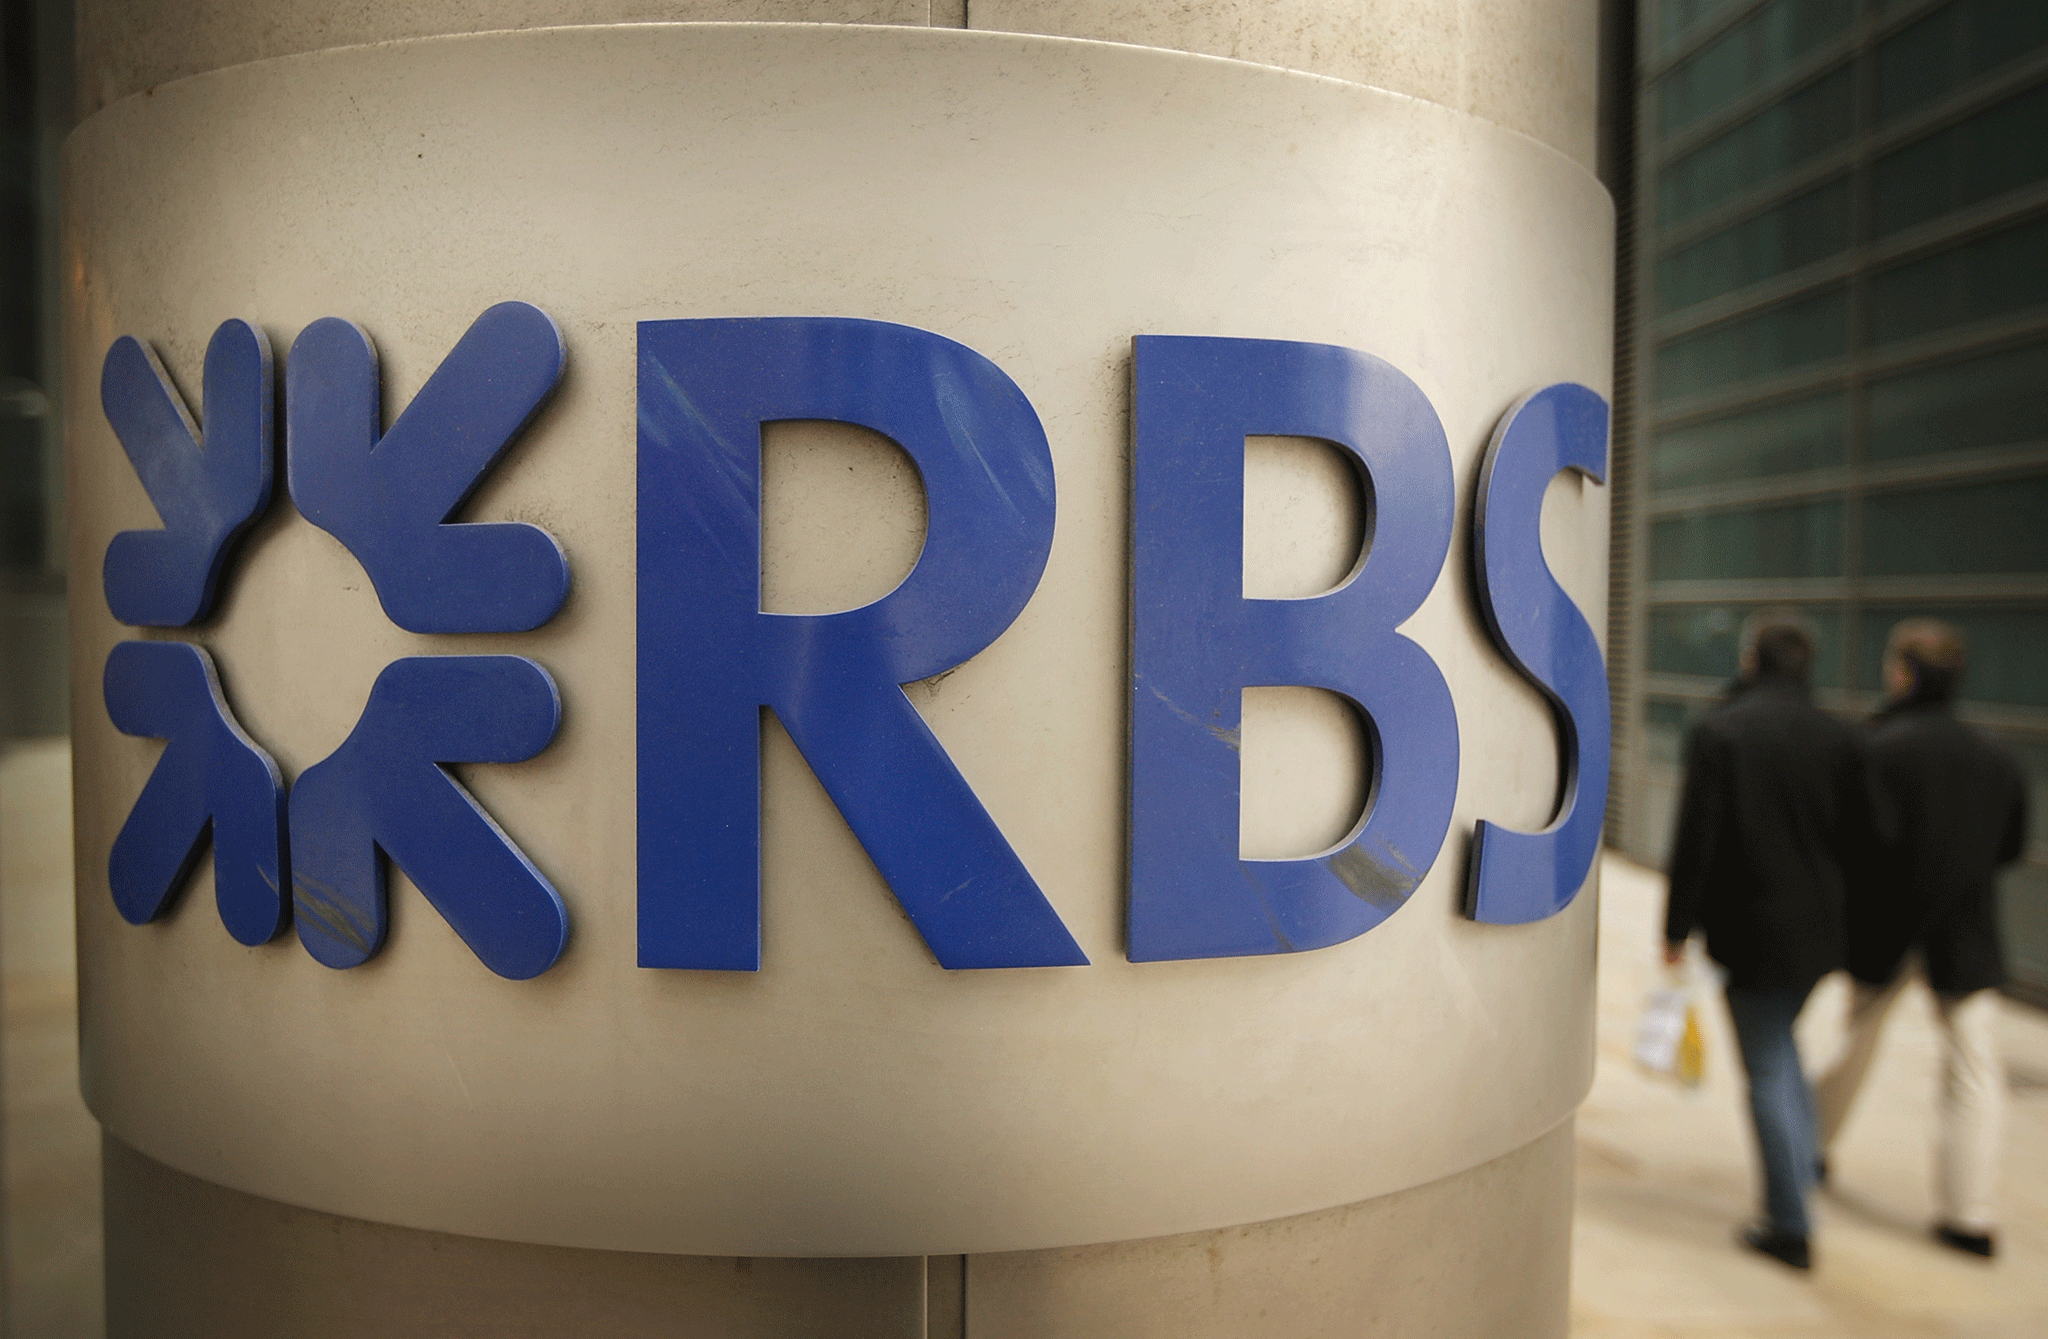 RBS has been implementing a huge restructuring programme over many years as it bids to return to profitability